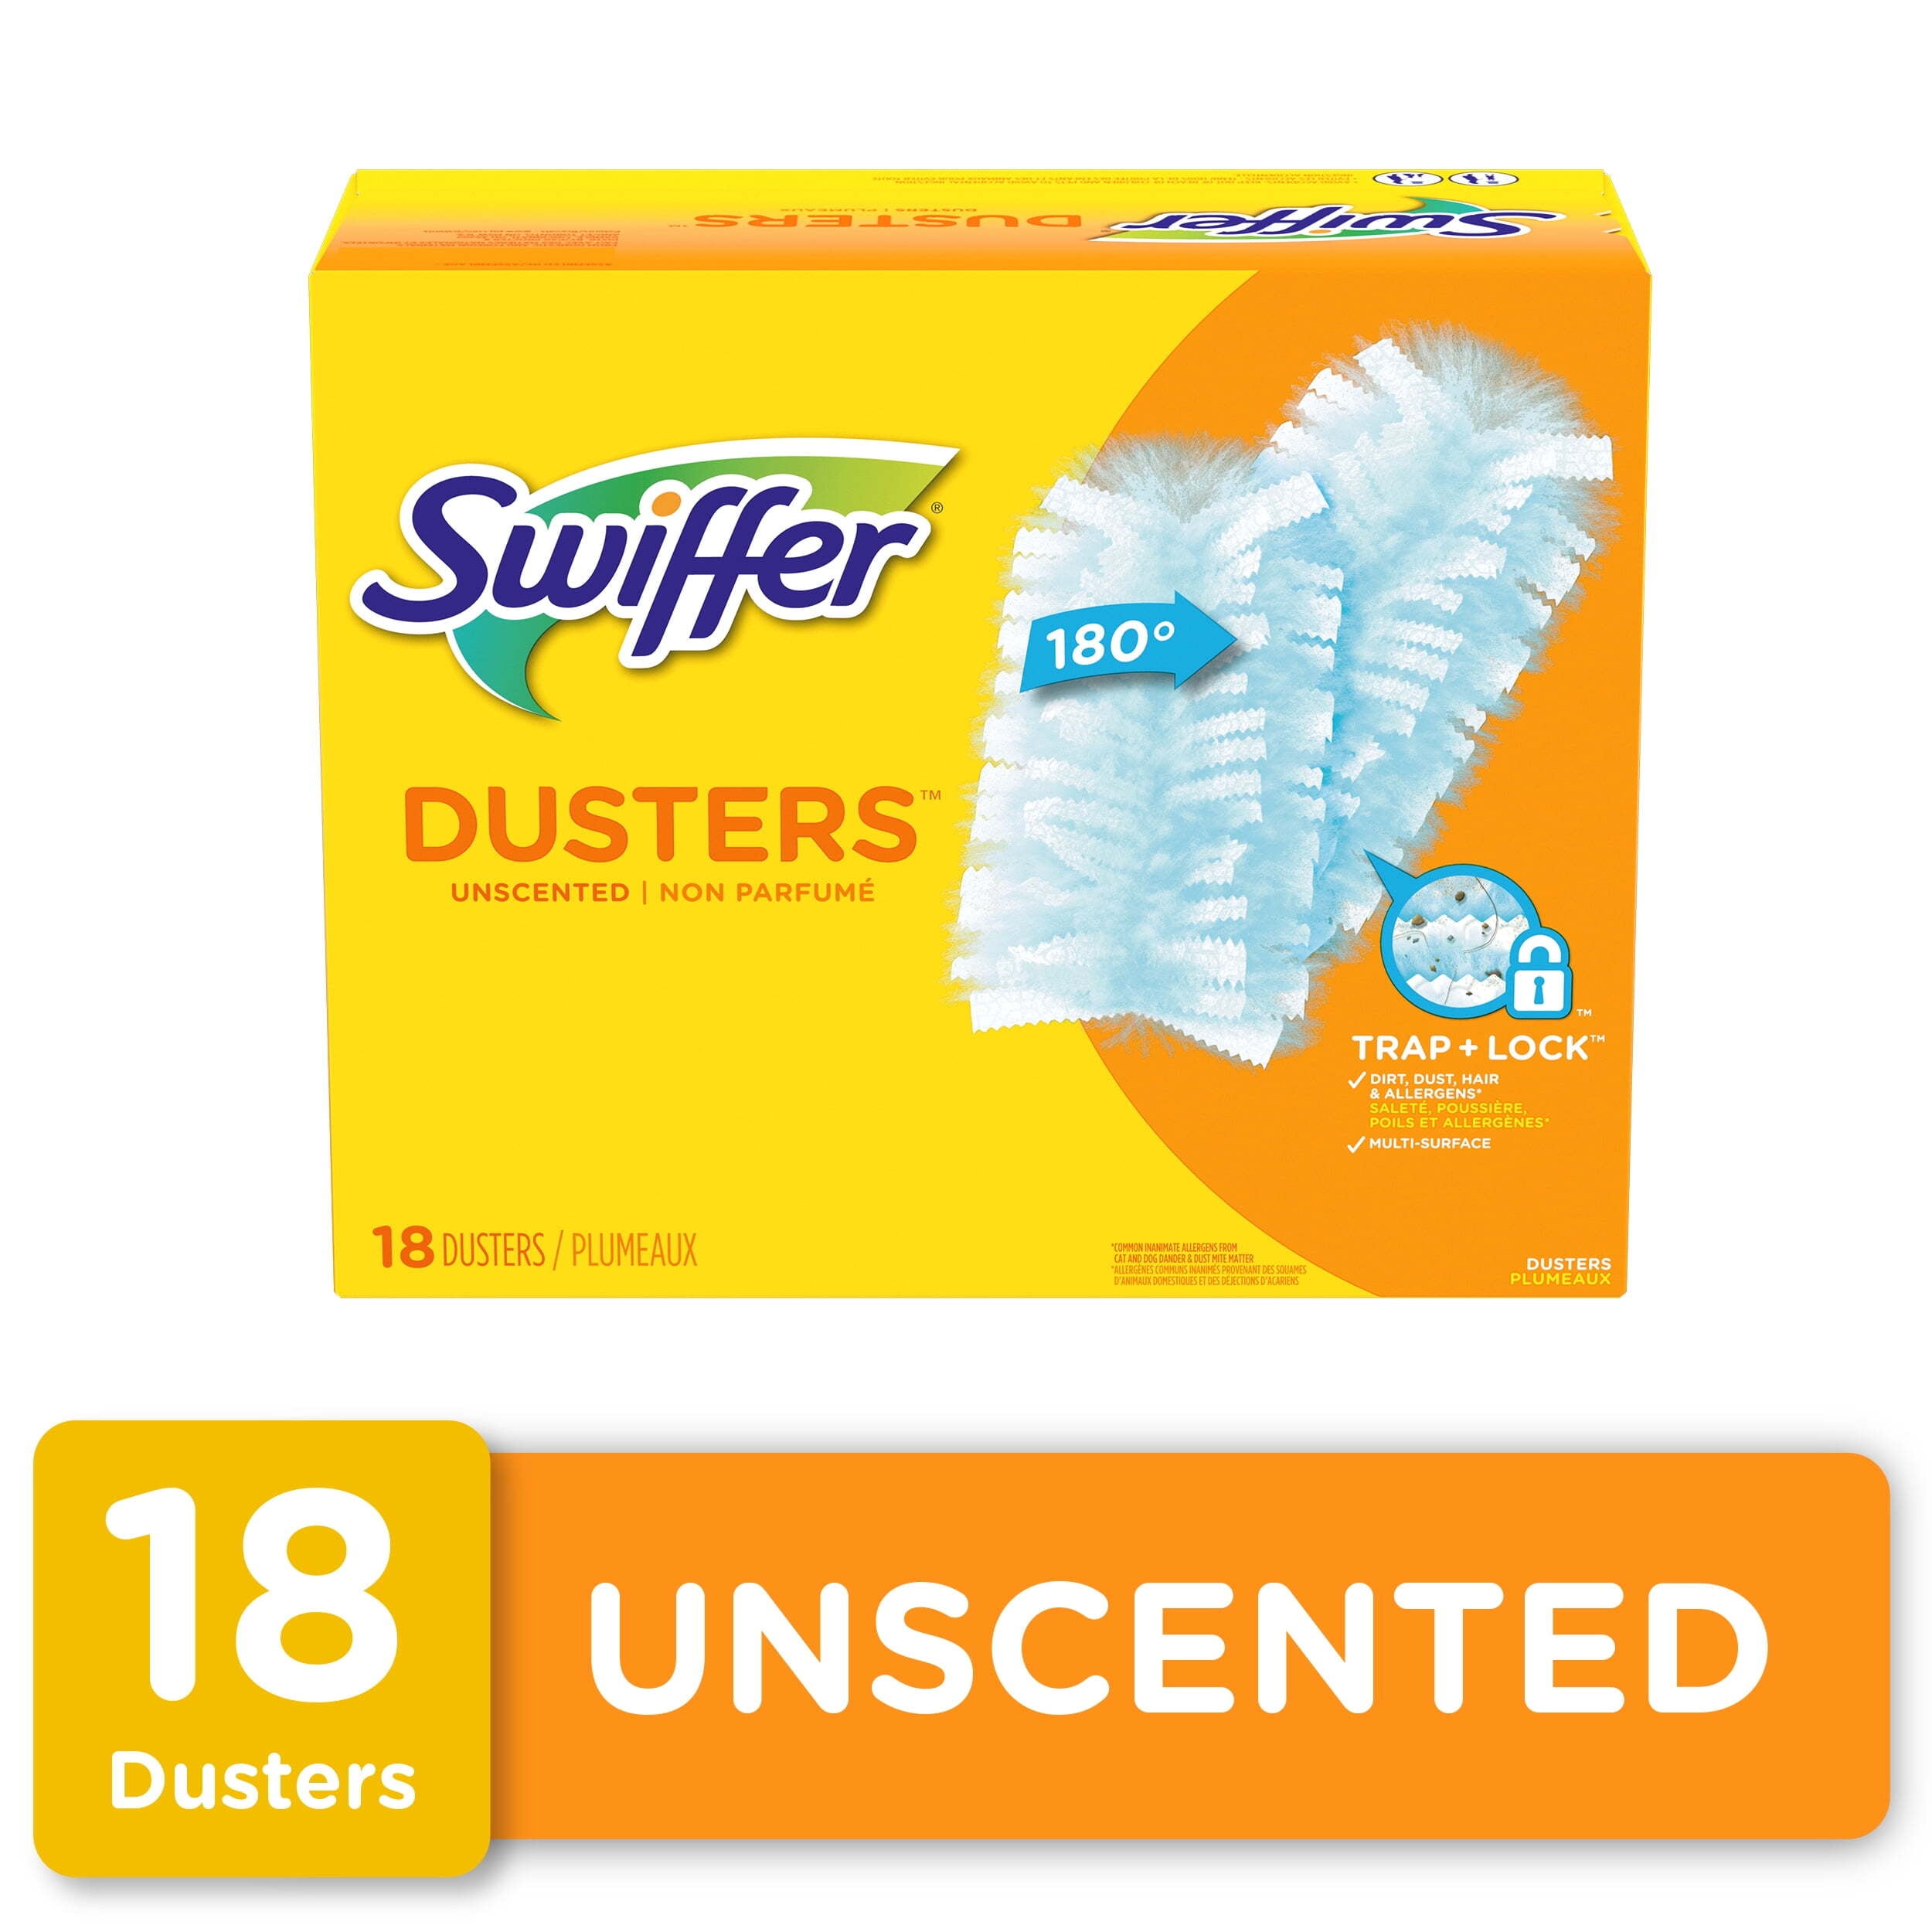 Swiffer Dusters Multi-Surface Duster Refills for Cleaning, Unscented, 18  count 